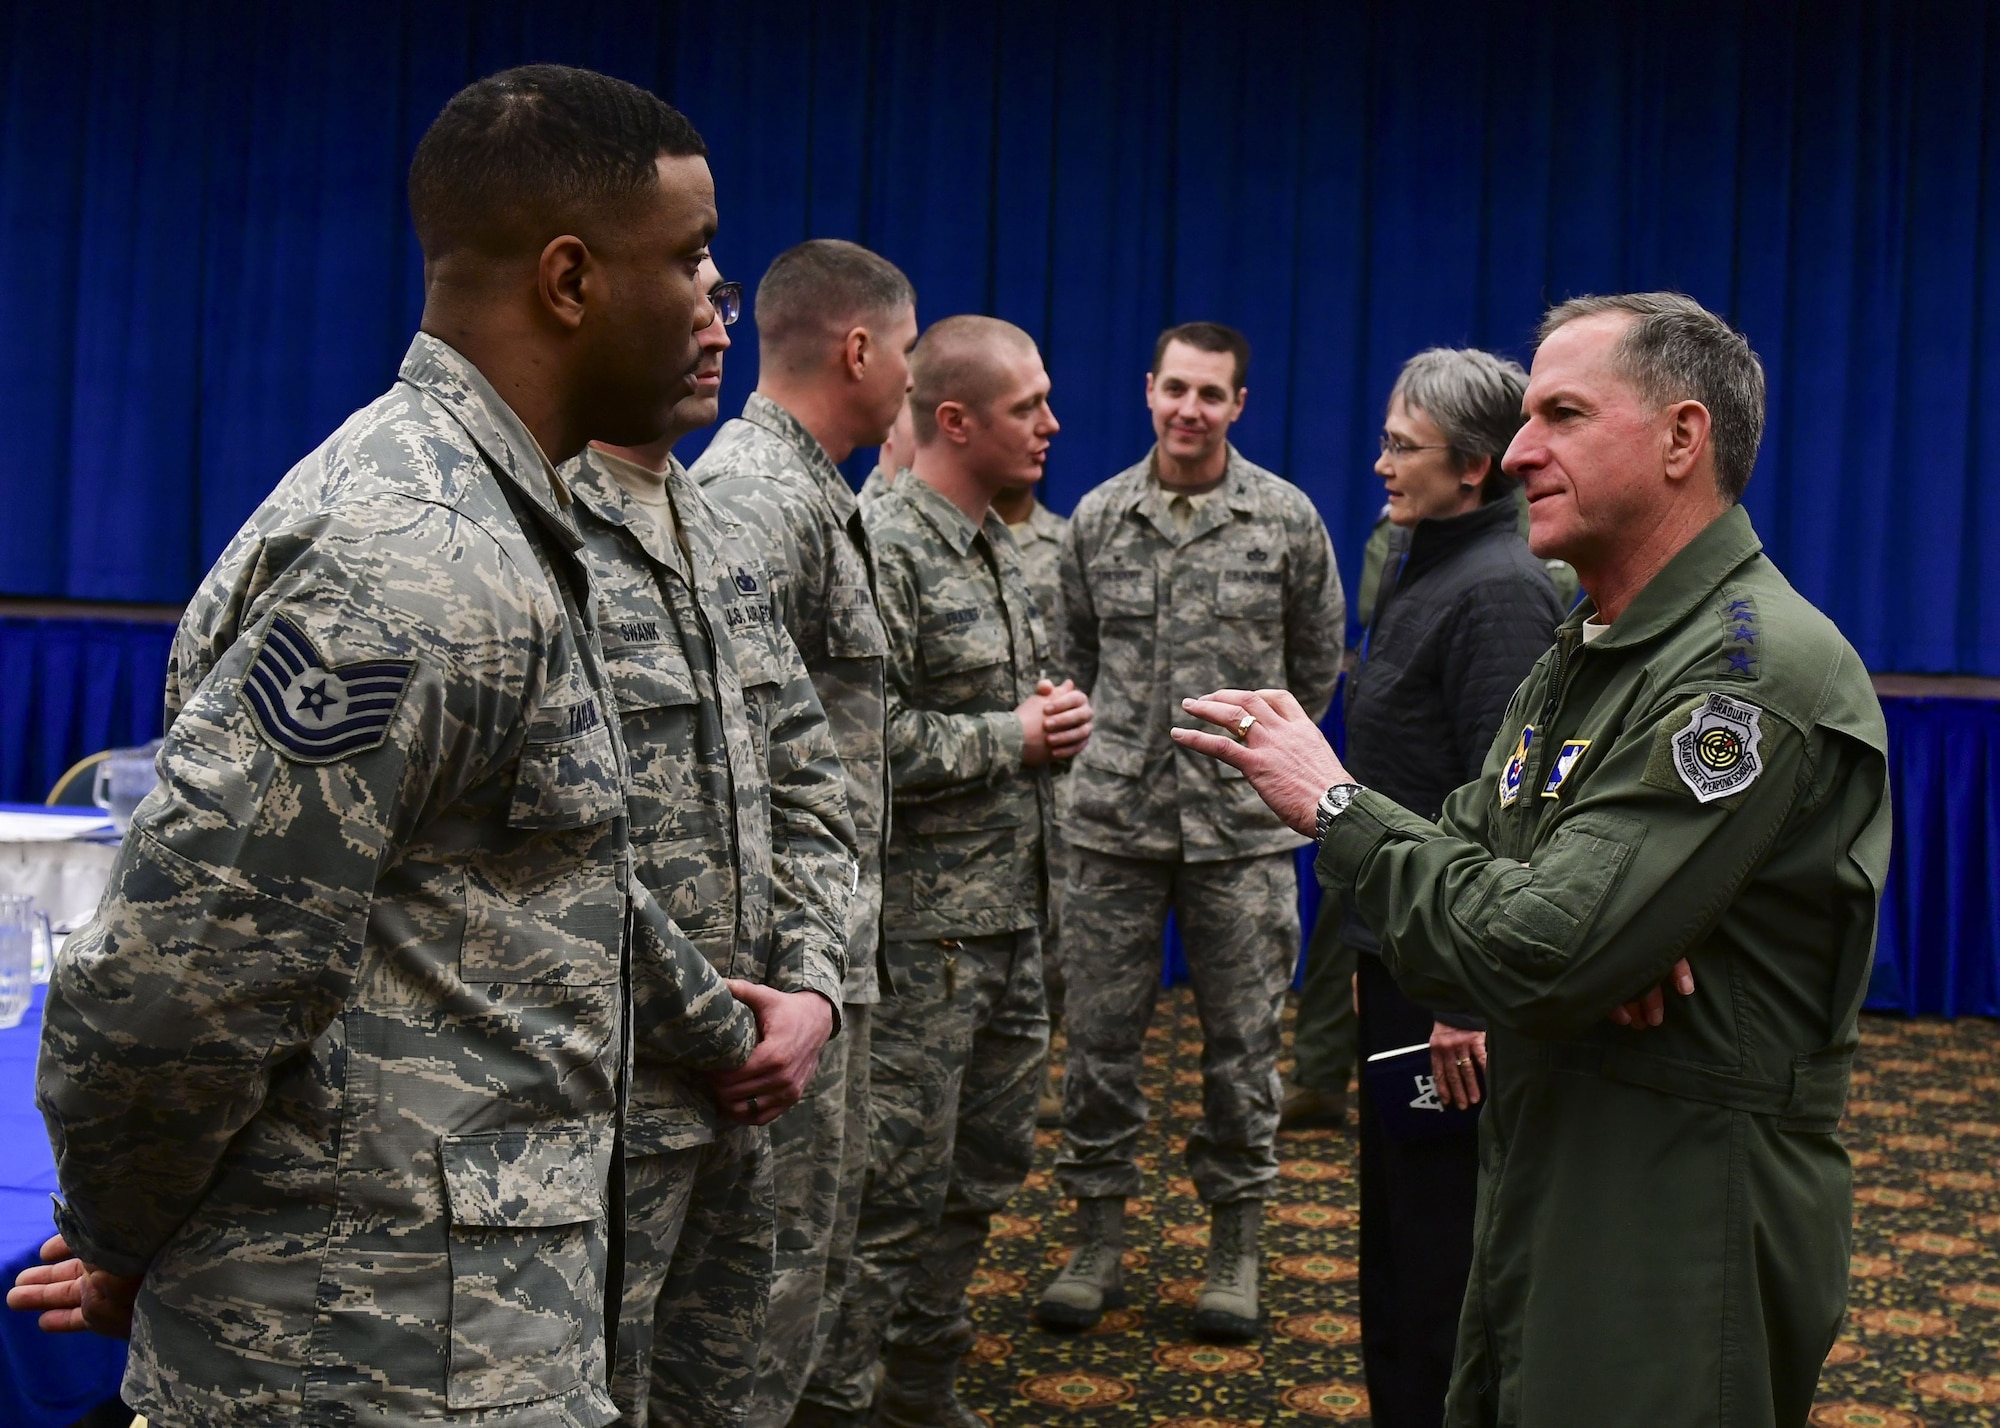 Secretary of the Air Force Heather Wilson and Air Force Chief of Staff Gen. David L. Goldfein speak with Airmen from the 8th Fighter Wing at Osan Air Base, Republic of Korea, January 29, 2018. Members of the Wolf Pack were recognized as superior performers by Wilson and Goldfein and briefed the senior leaders on the specific mission sets in their respective fields. (U.S. Air Force photo by Staff Sgt. Franklin R. Ramos)